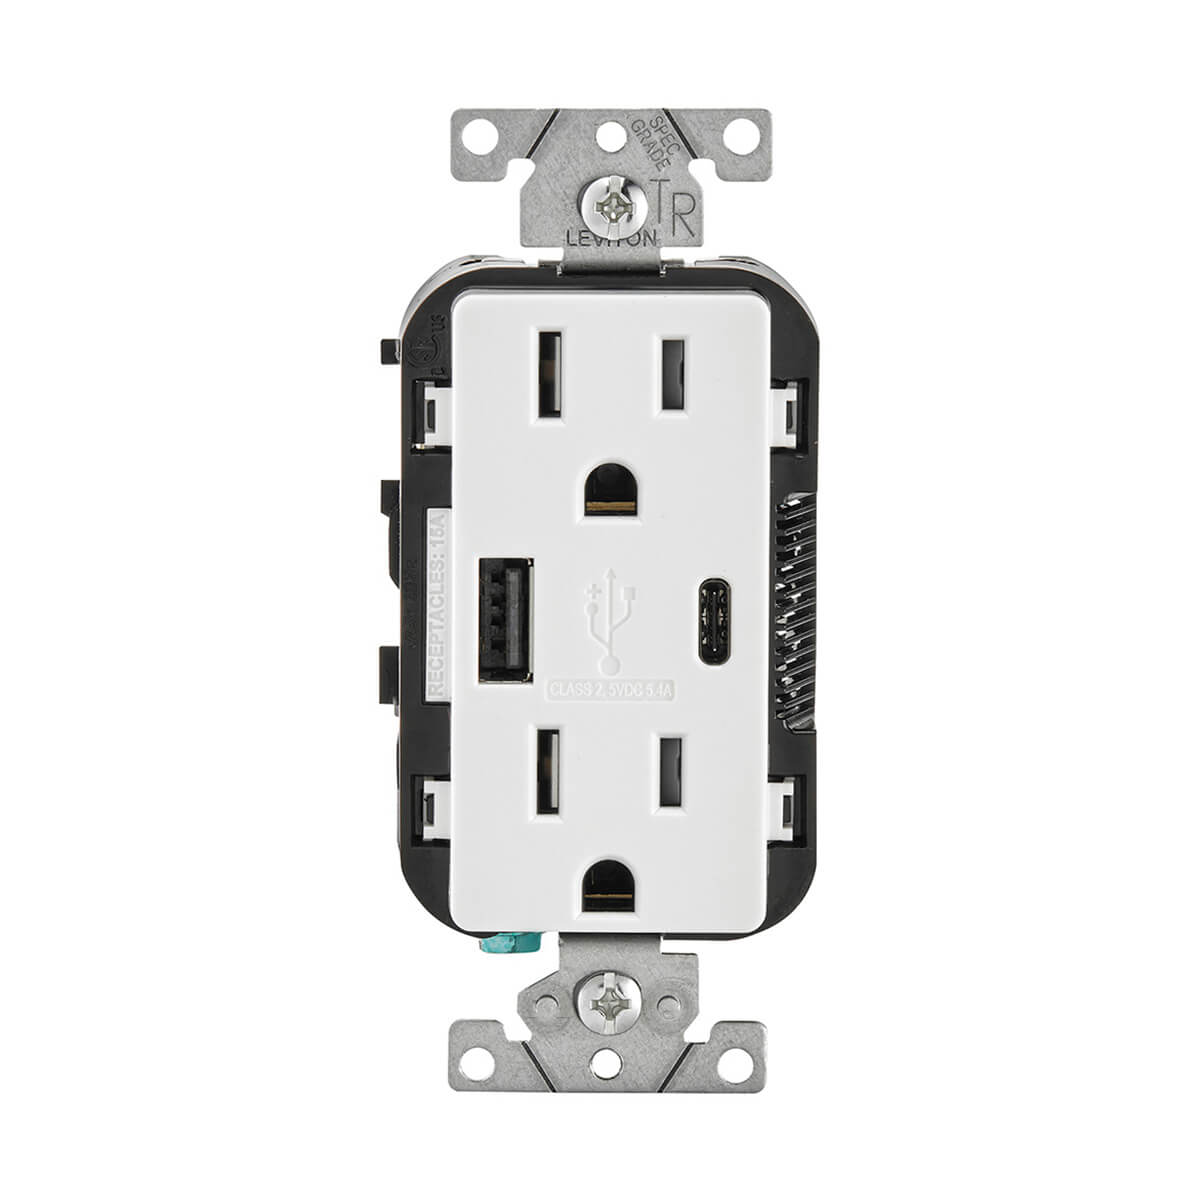 Leviton® Decora Duplex Outlet and USB charger - White - 15 amp 125 V